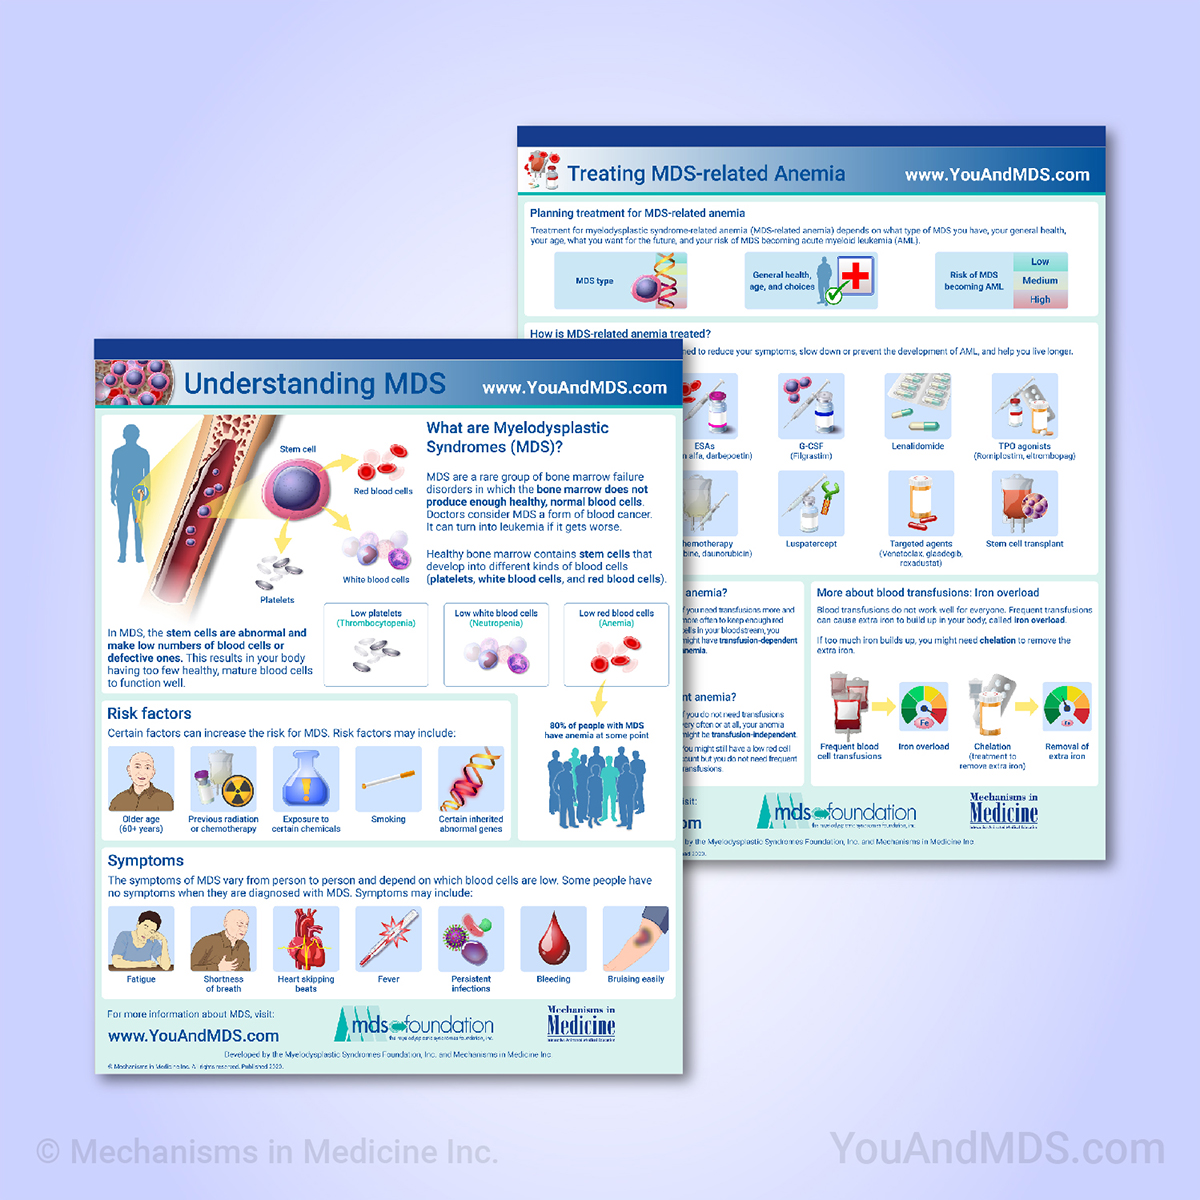 These free infographics can be downloaded and shared to help promote MDS education and awareness.